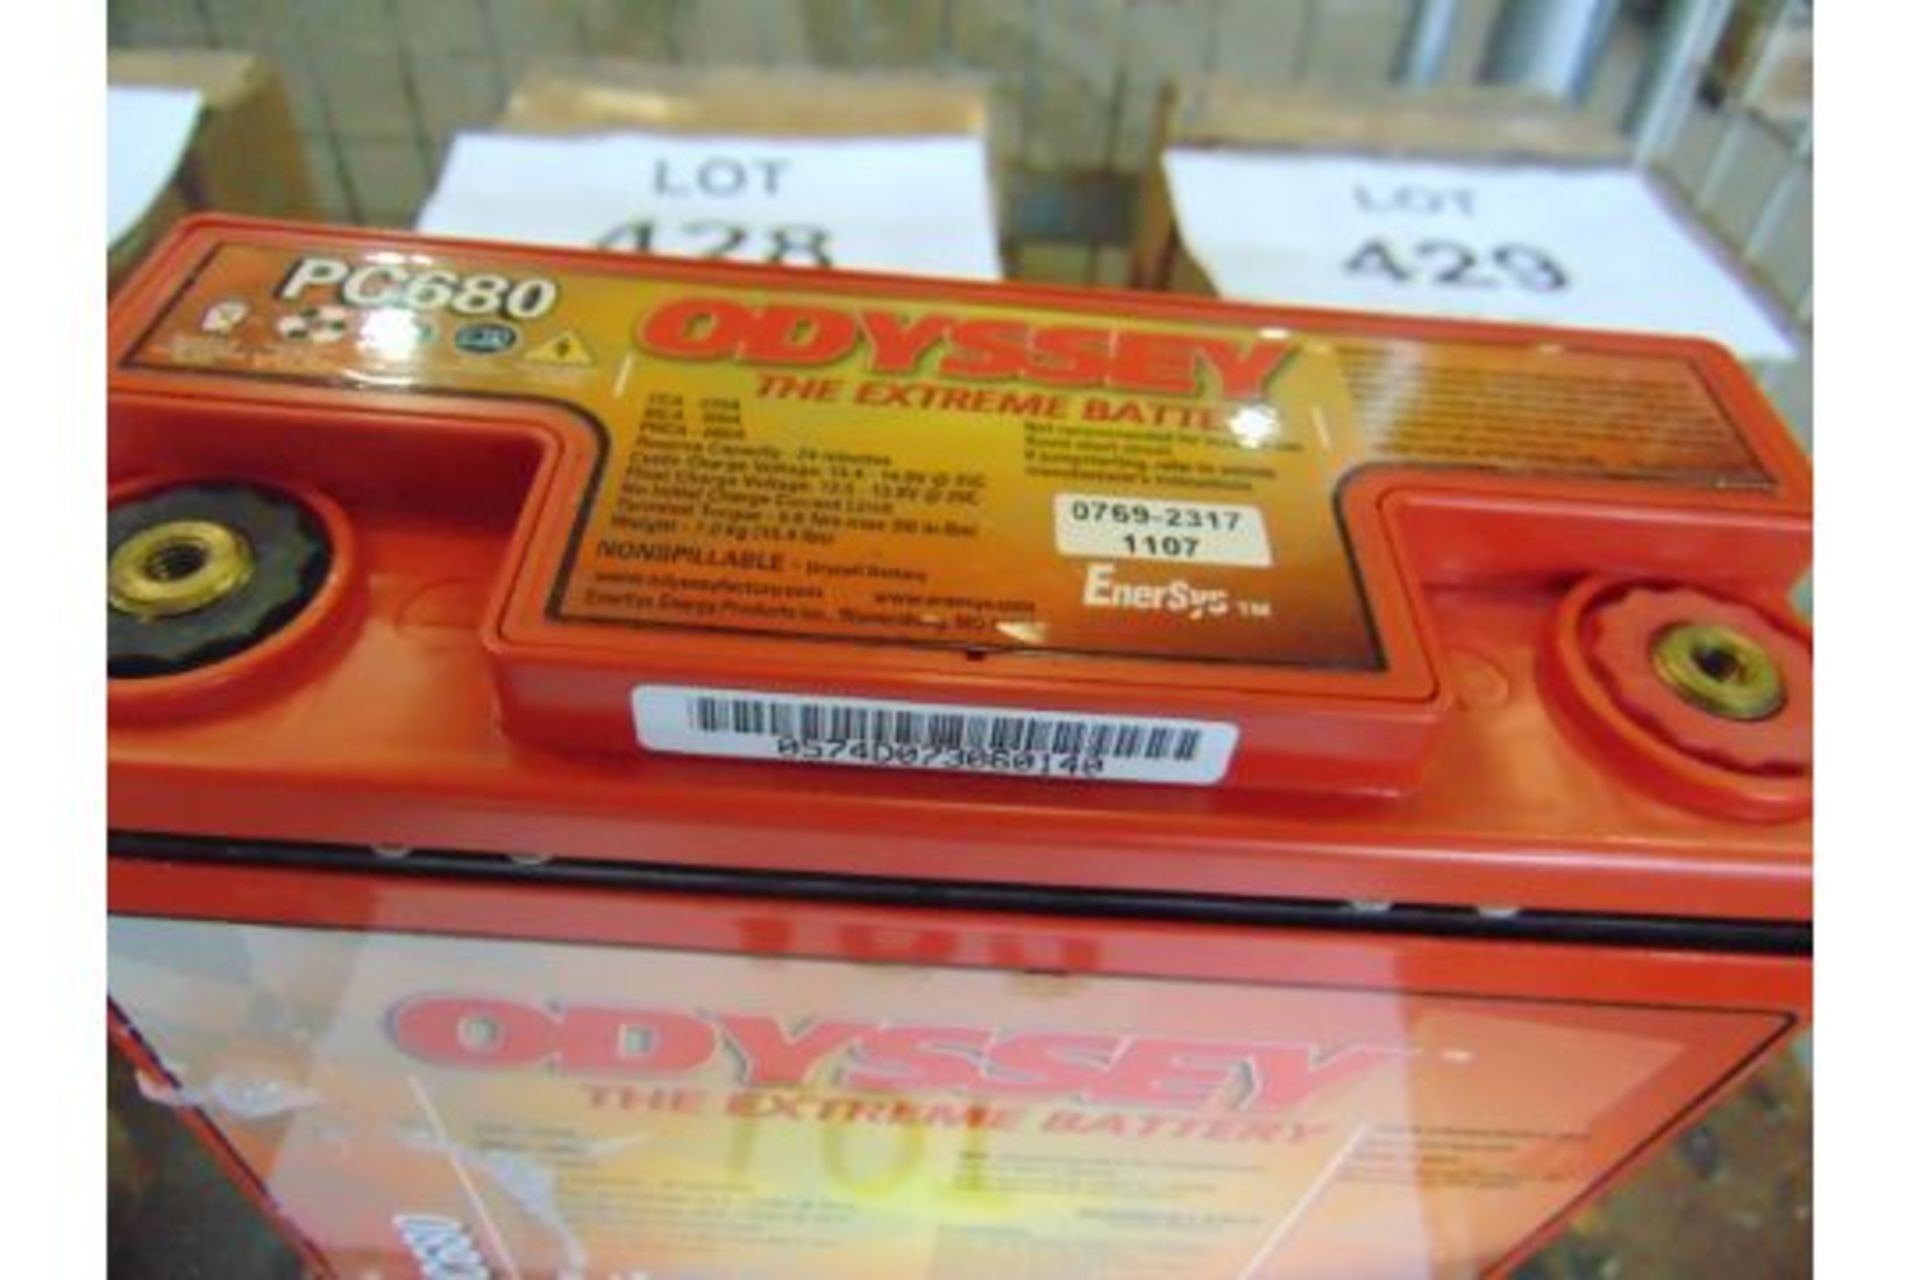 2 x ODYSSEY Extreme Pc680 MJ non spillable 12 Volt Batteries Unissued - Image 4 of 4